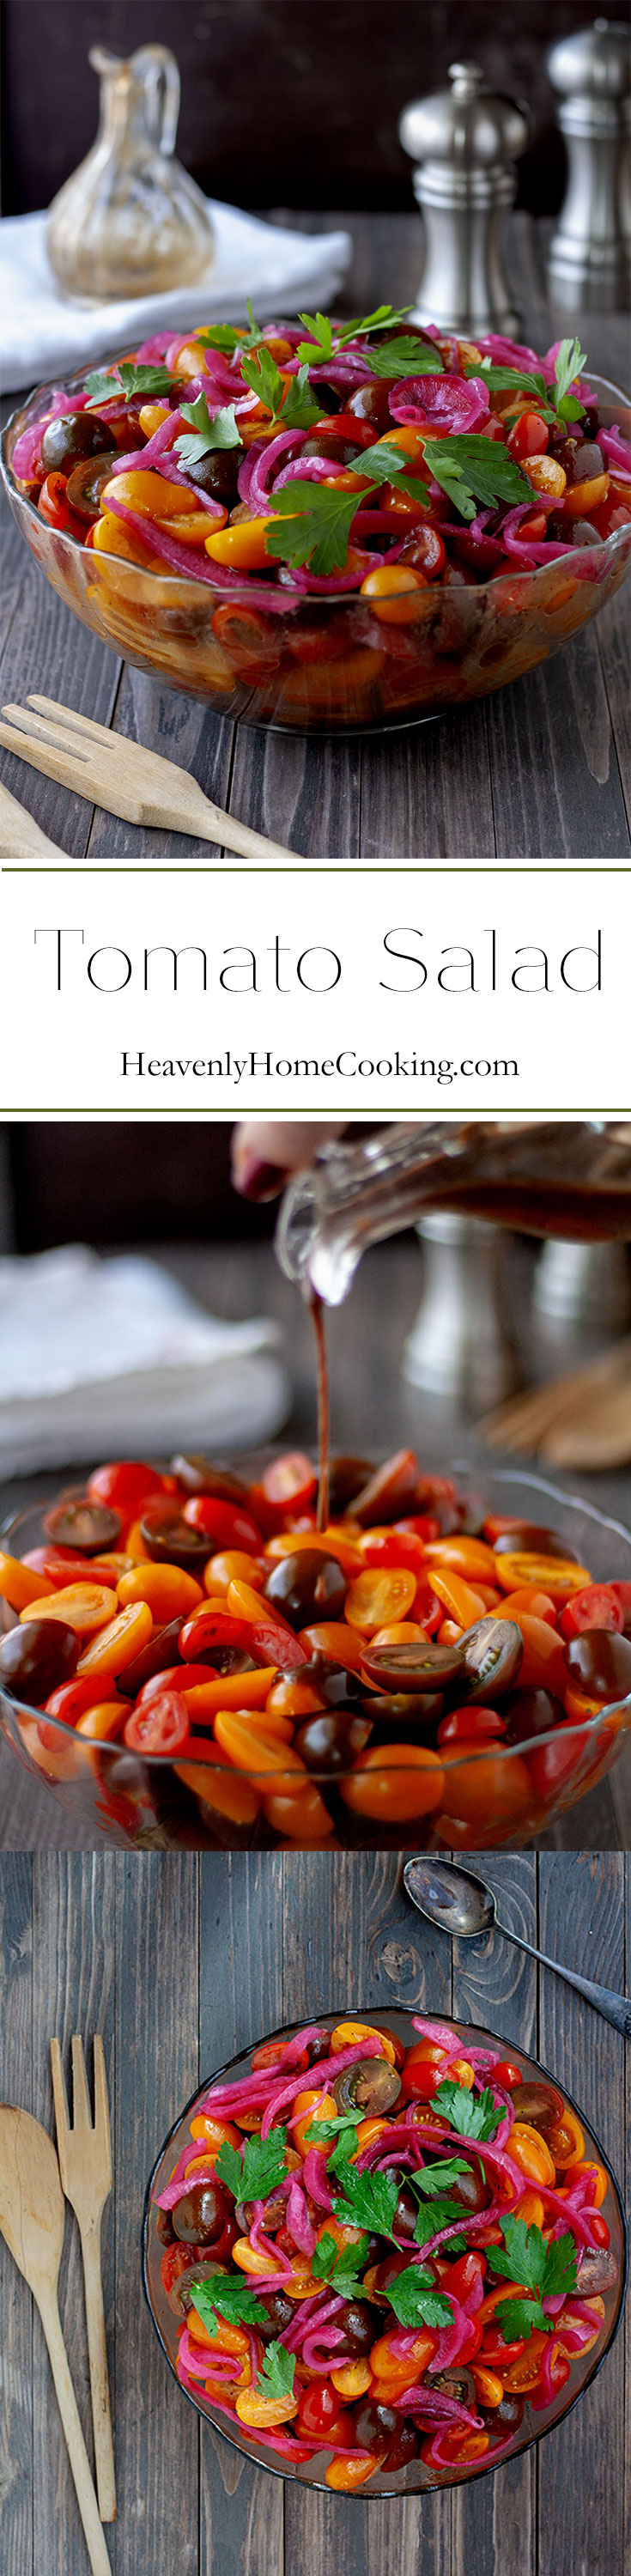 Tomato Salad | This easy, delicious, tangy tomato salad is the perfect summer side dish. Bring it to your next BBQ for rave reviews! | www.heavenlyhomecooking.com